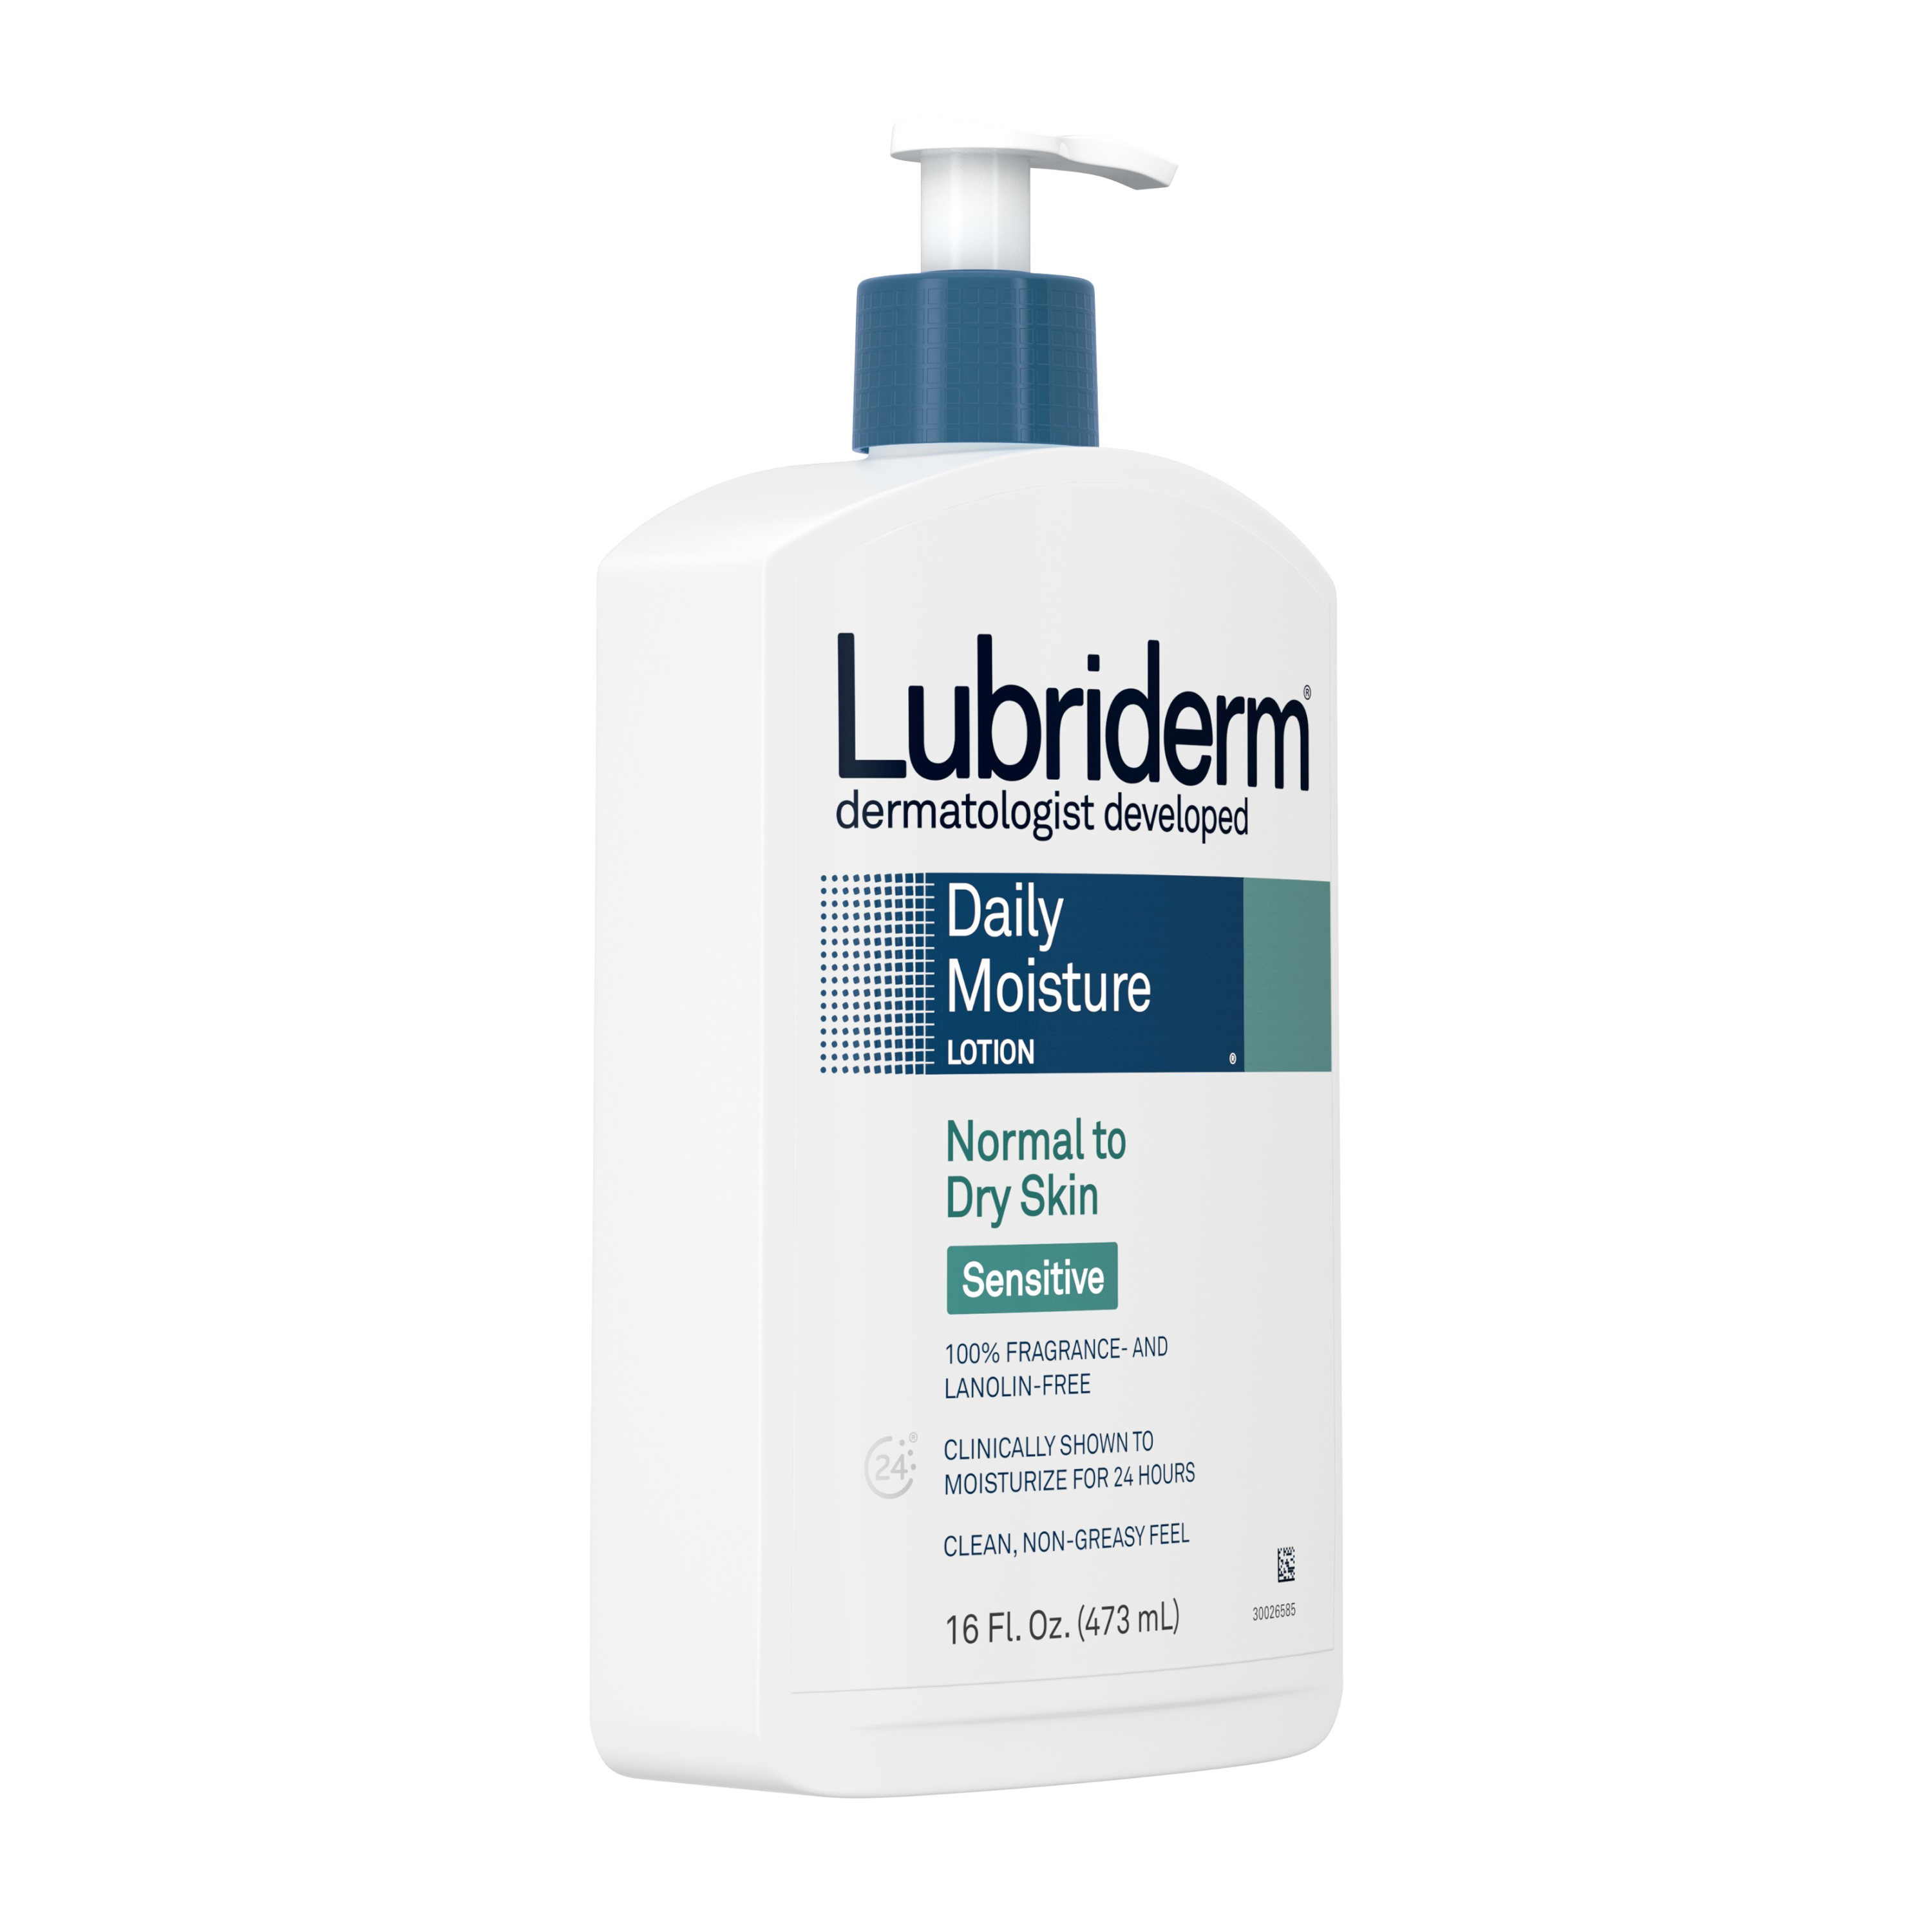 Lubriderm Daily Moisture Body Lotion for Dry Sensitive Skin, 16 fl. oz - image 4 of 10